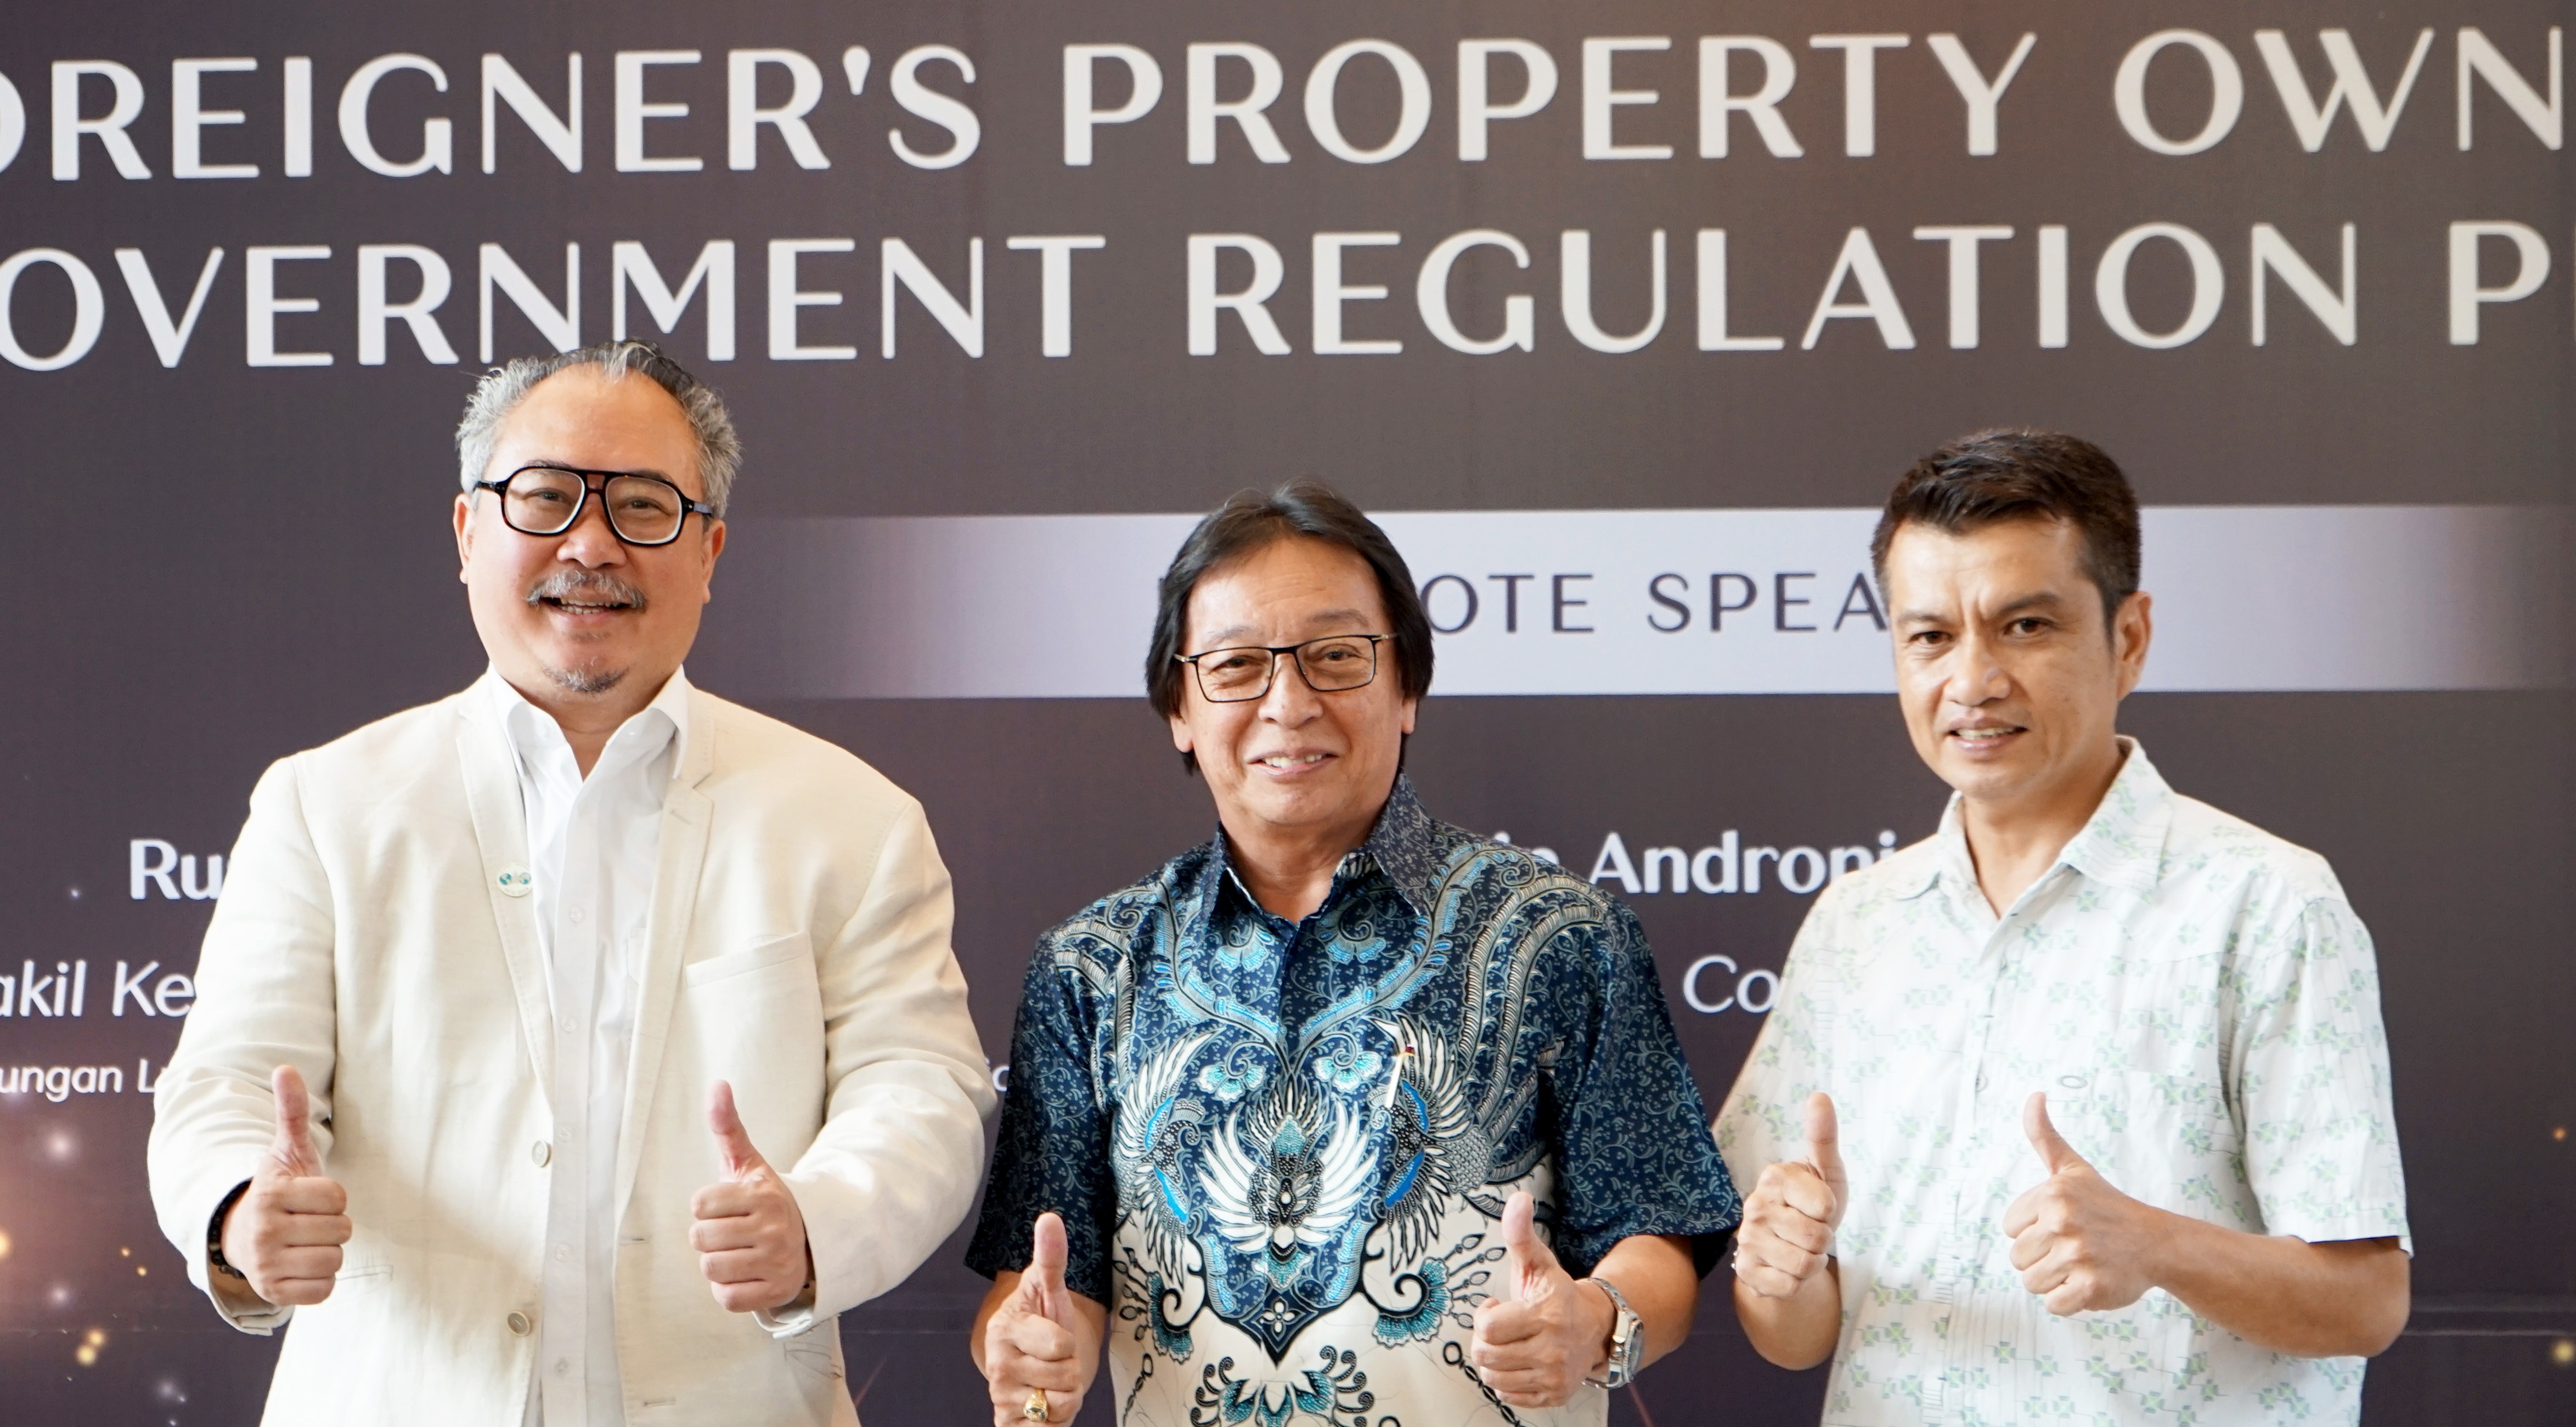 EleVee Media-Talk : “How Developers Accommodate Foreigners's Property Ownership as Government Regulation PP 18/2021”